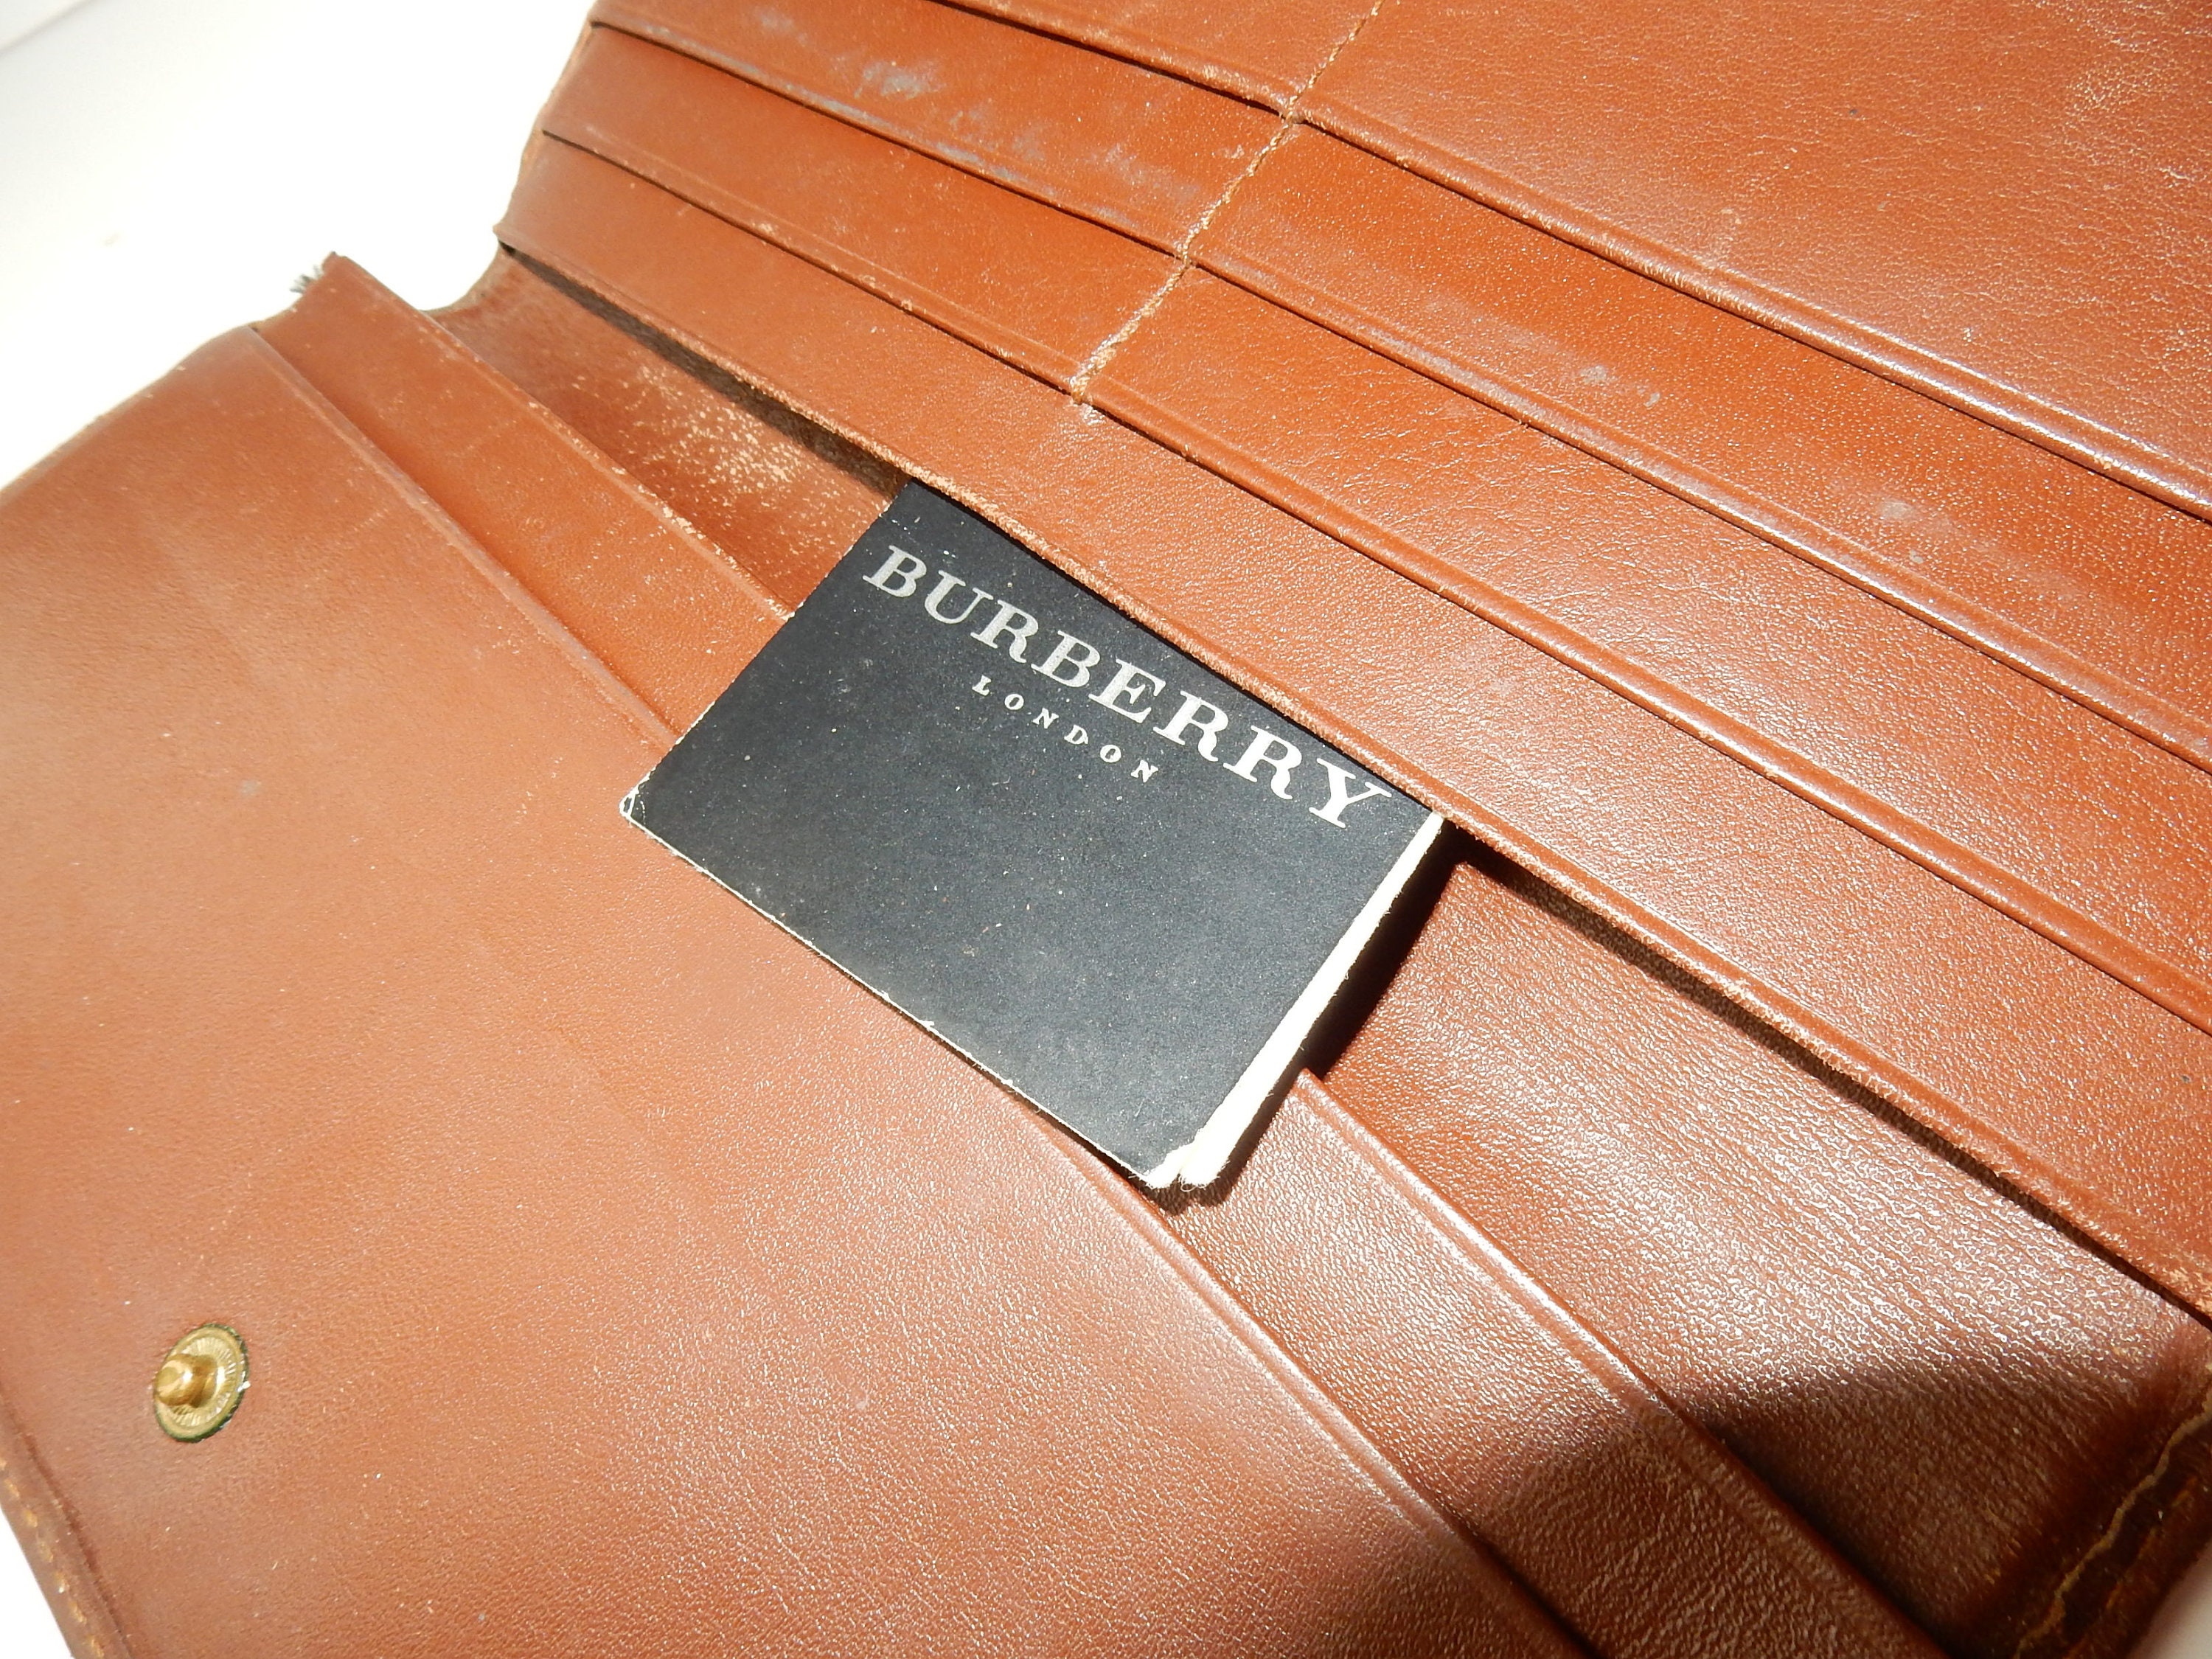 Burberry wallet: real or fake?